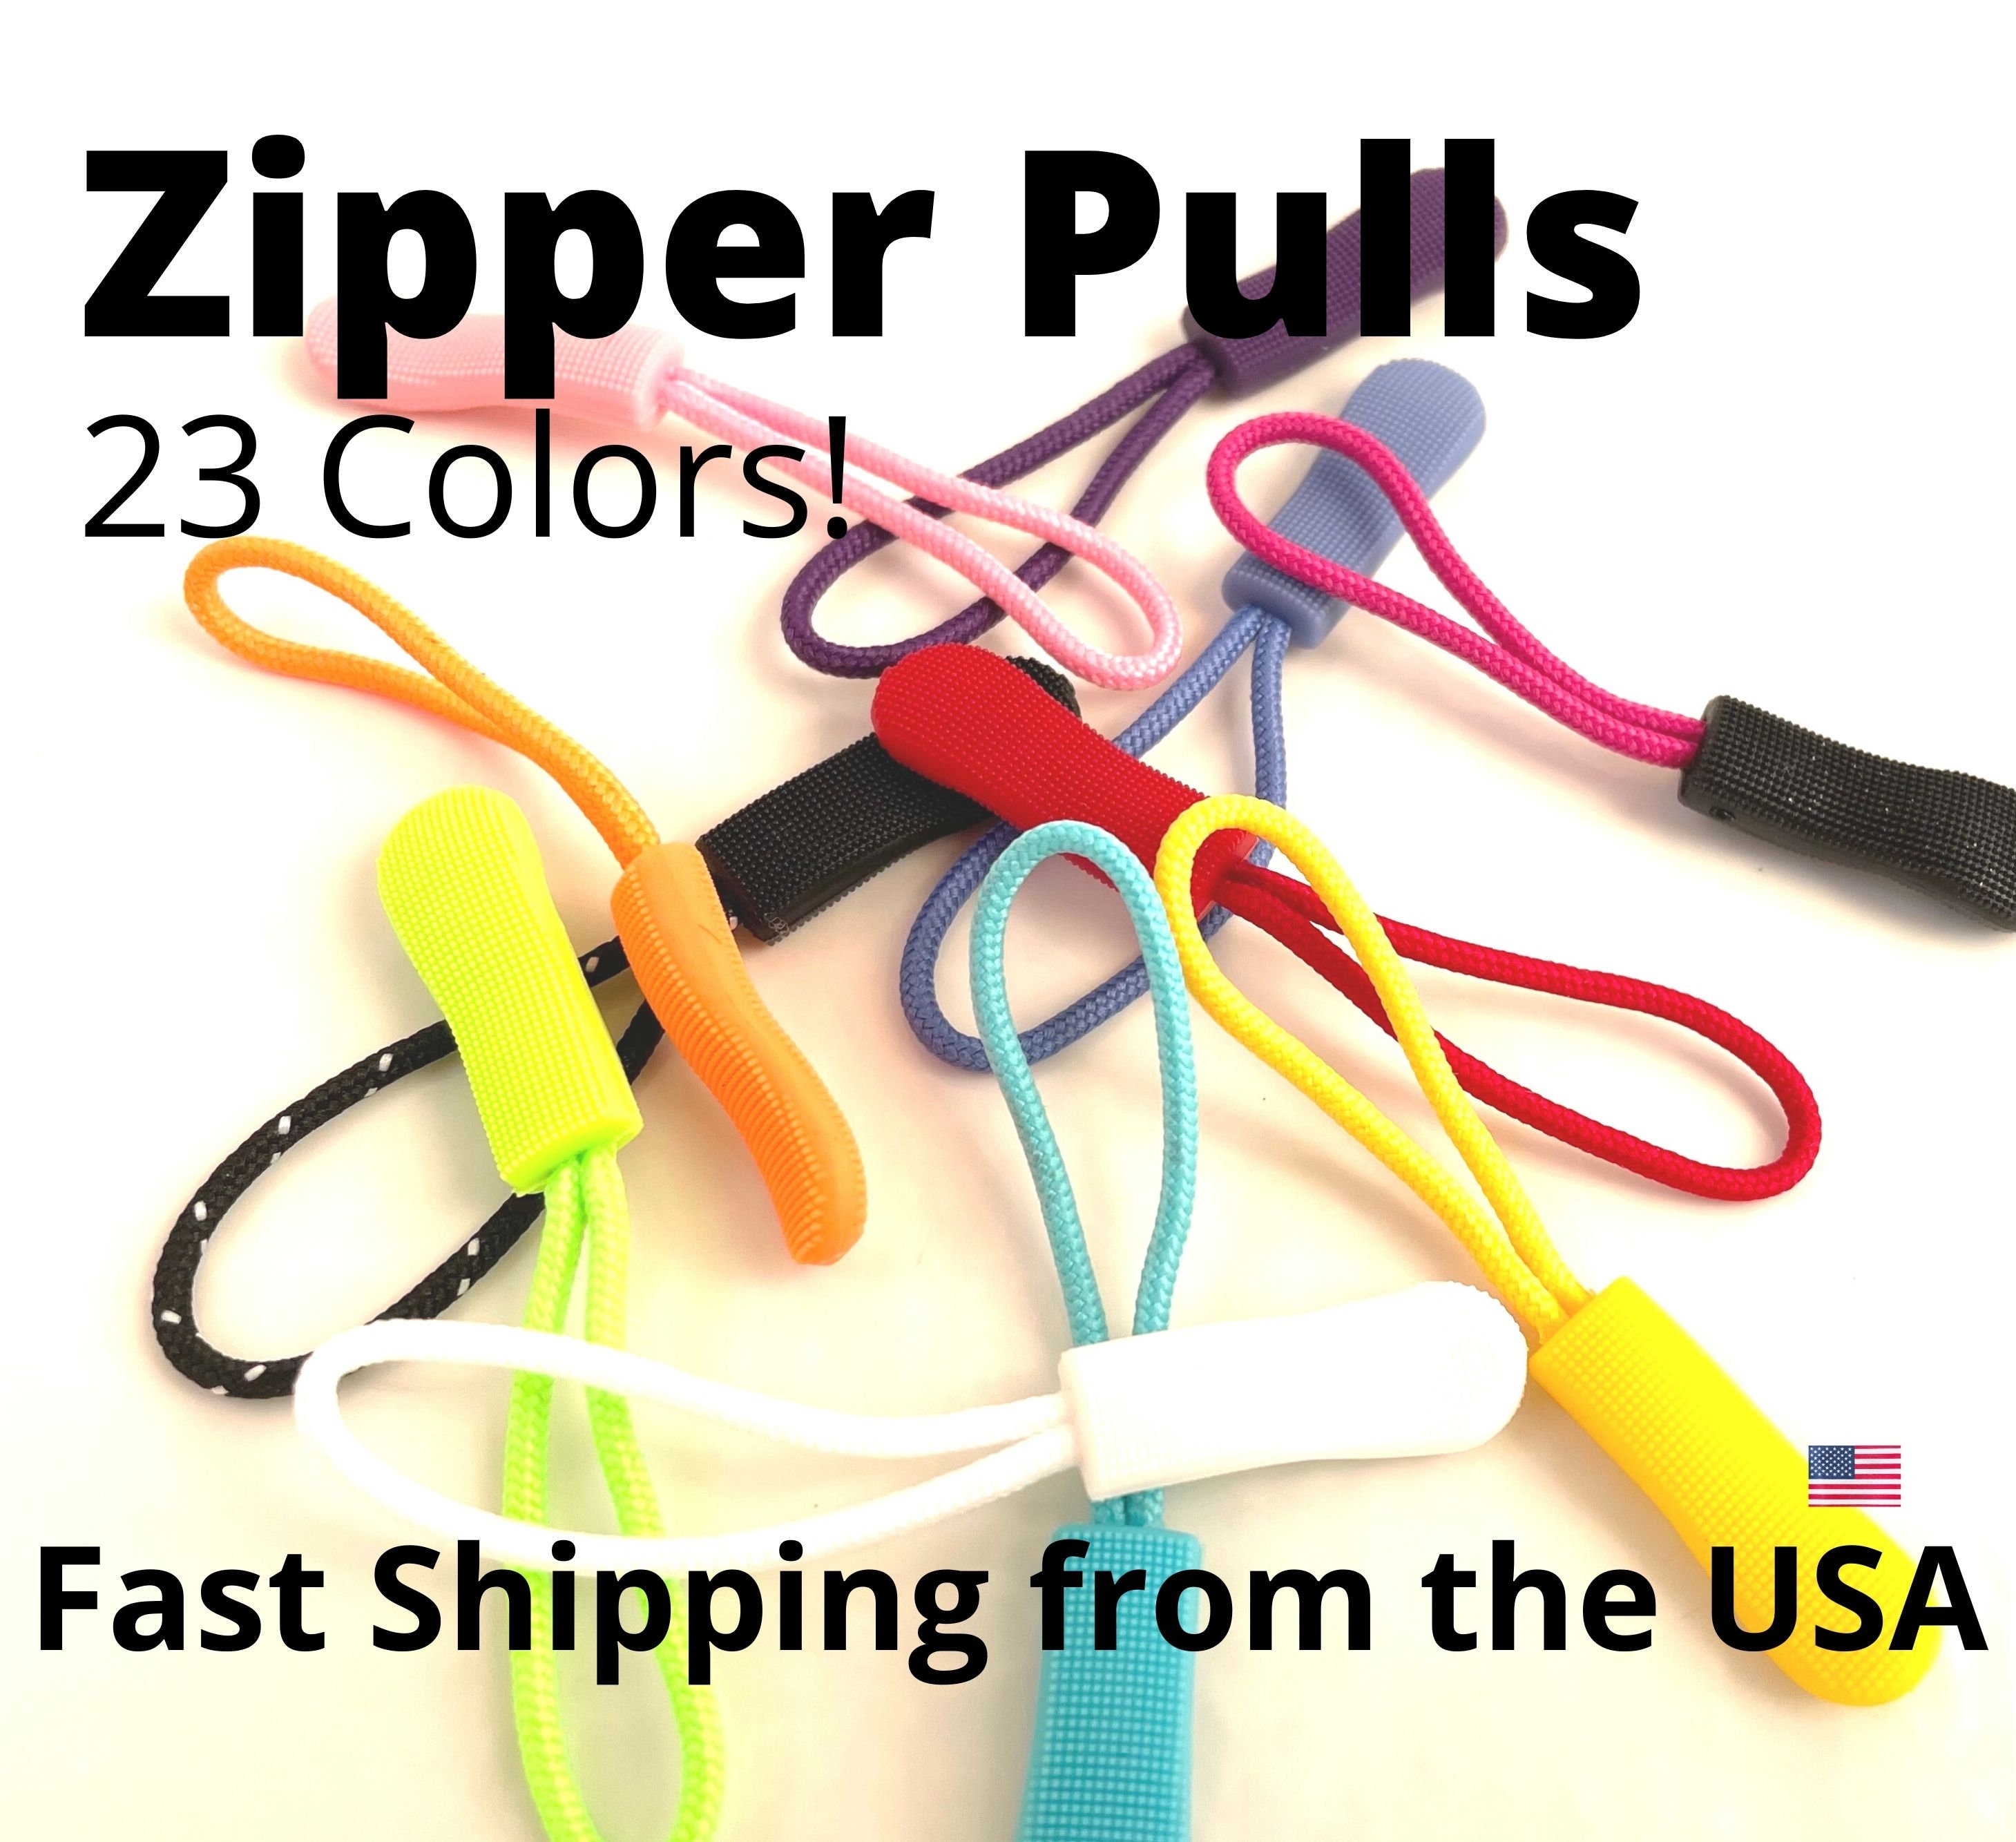 Buy Zipper Pull Tab for Backpack, Gym Bag, Cover, Jacket, Purse